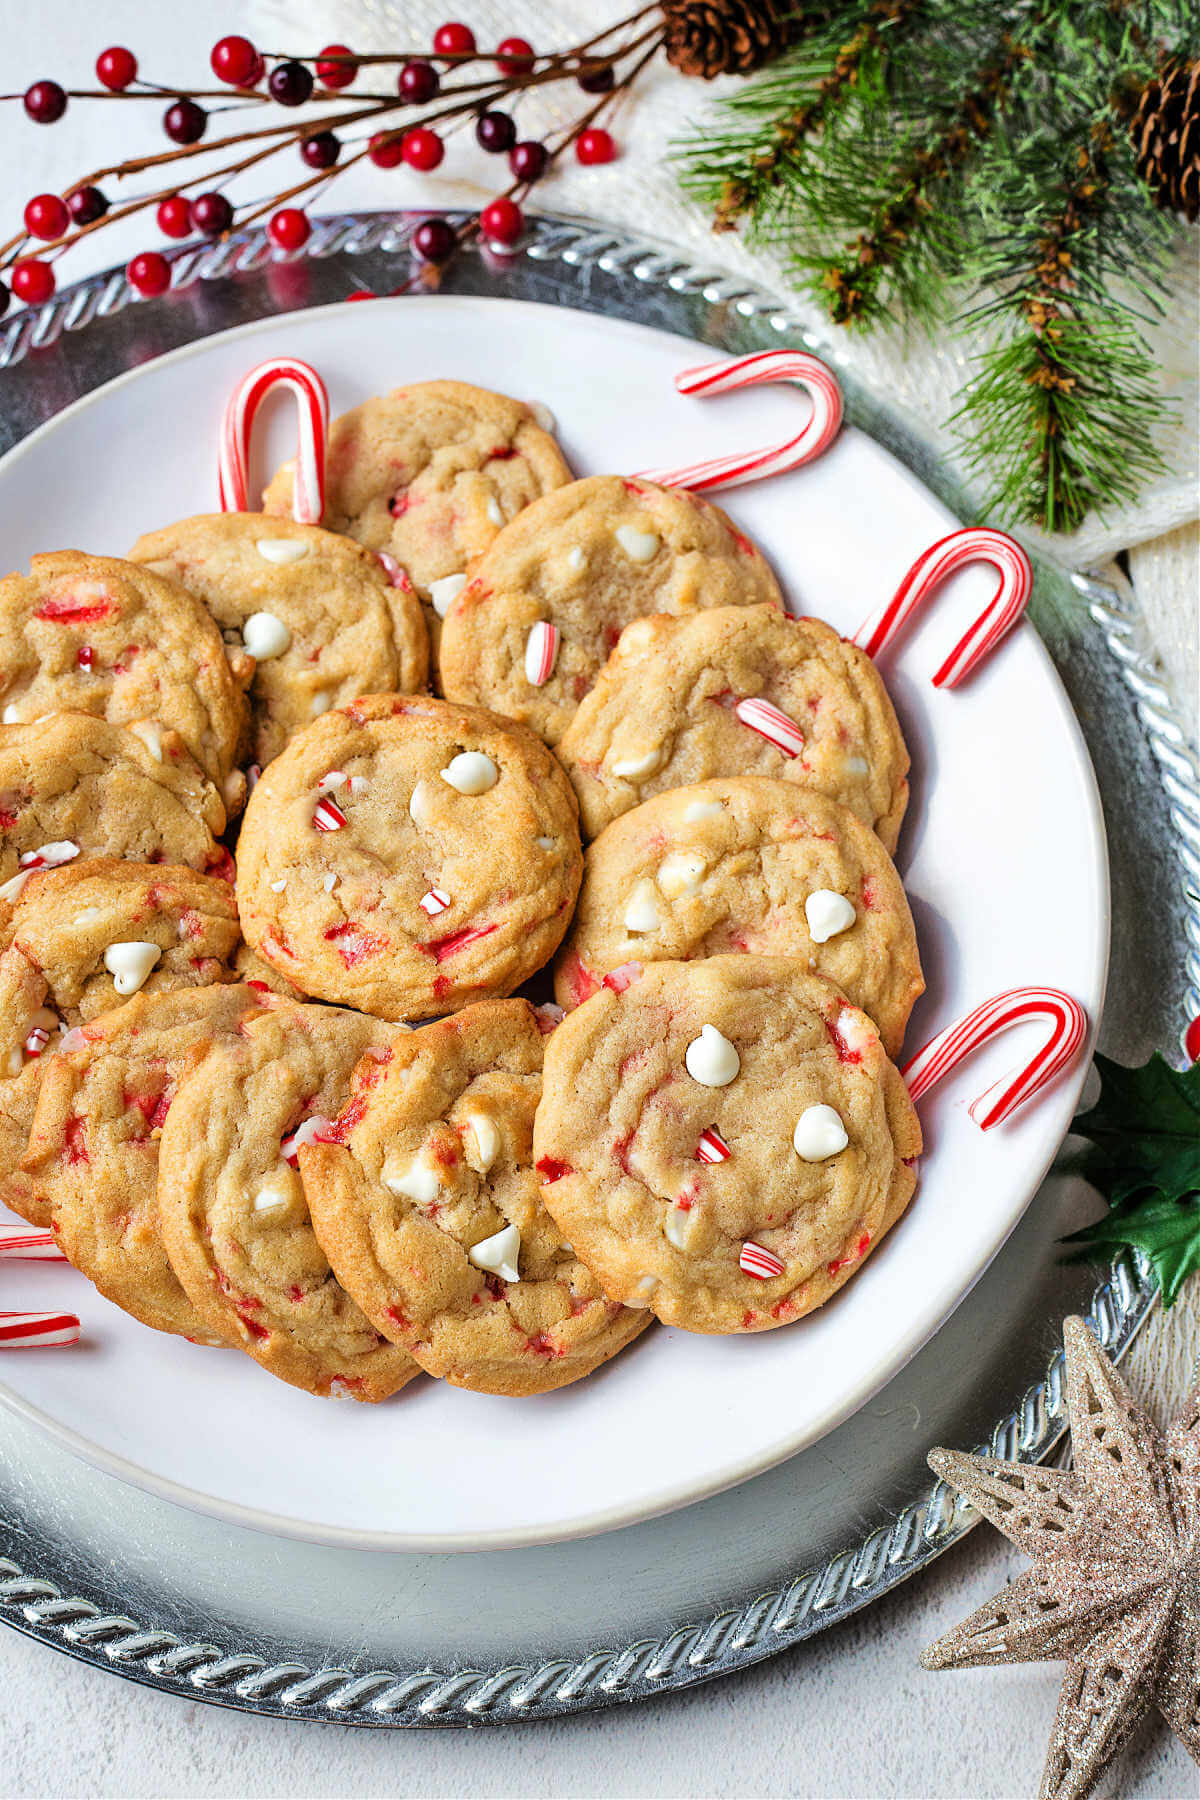 white chocolate chip peppermint cookies on a plate with candy canes on a table decorated with holiday decor.